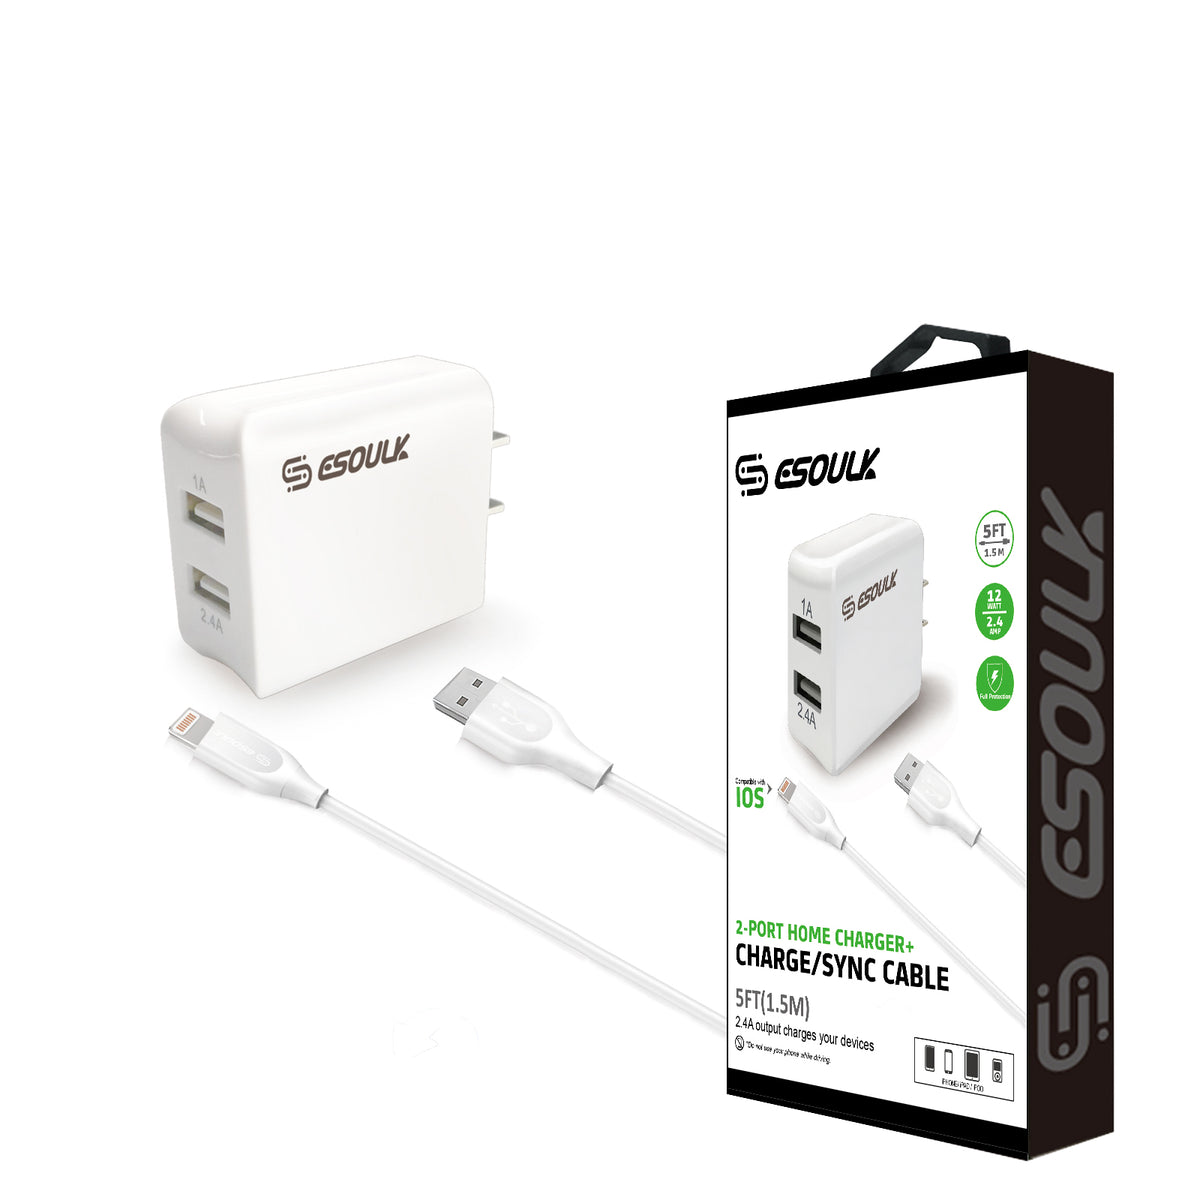 Esoulk Iphone 2-Port Home Charger with 5feet Cable - White